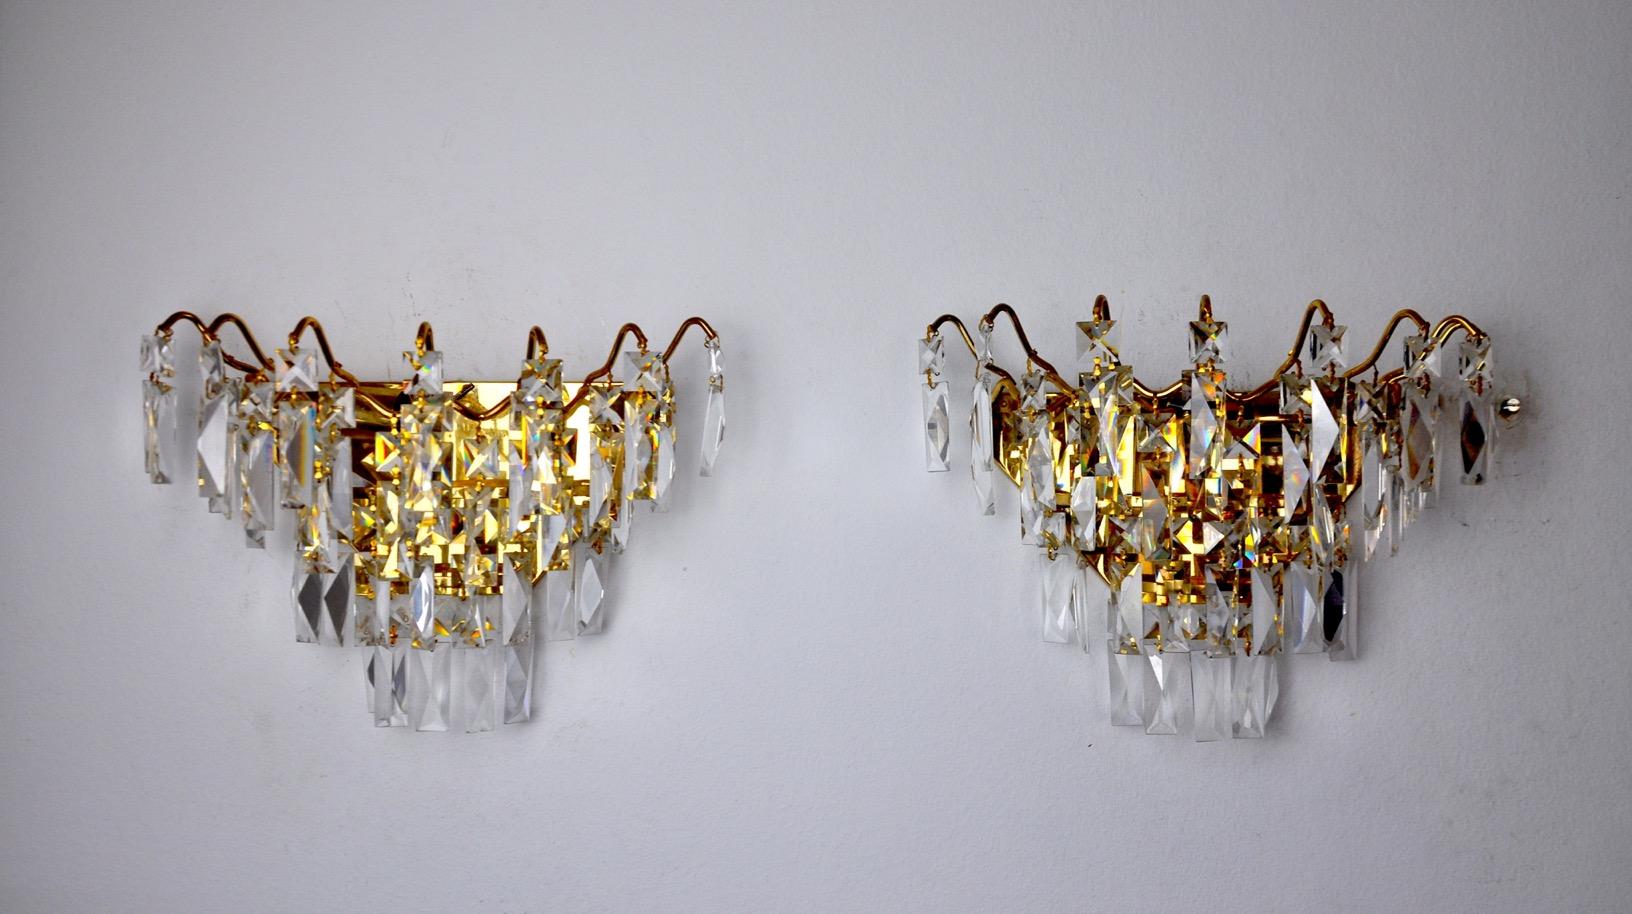 Very nice pair of hollywood regency sconces dating from the 80s. The sconces are made of cut rocca crystals and a gilded metal structure. Unique design object that will illuminate your interior wonderfully. Electricity checked, perfect state of